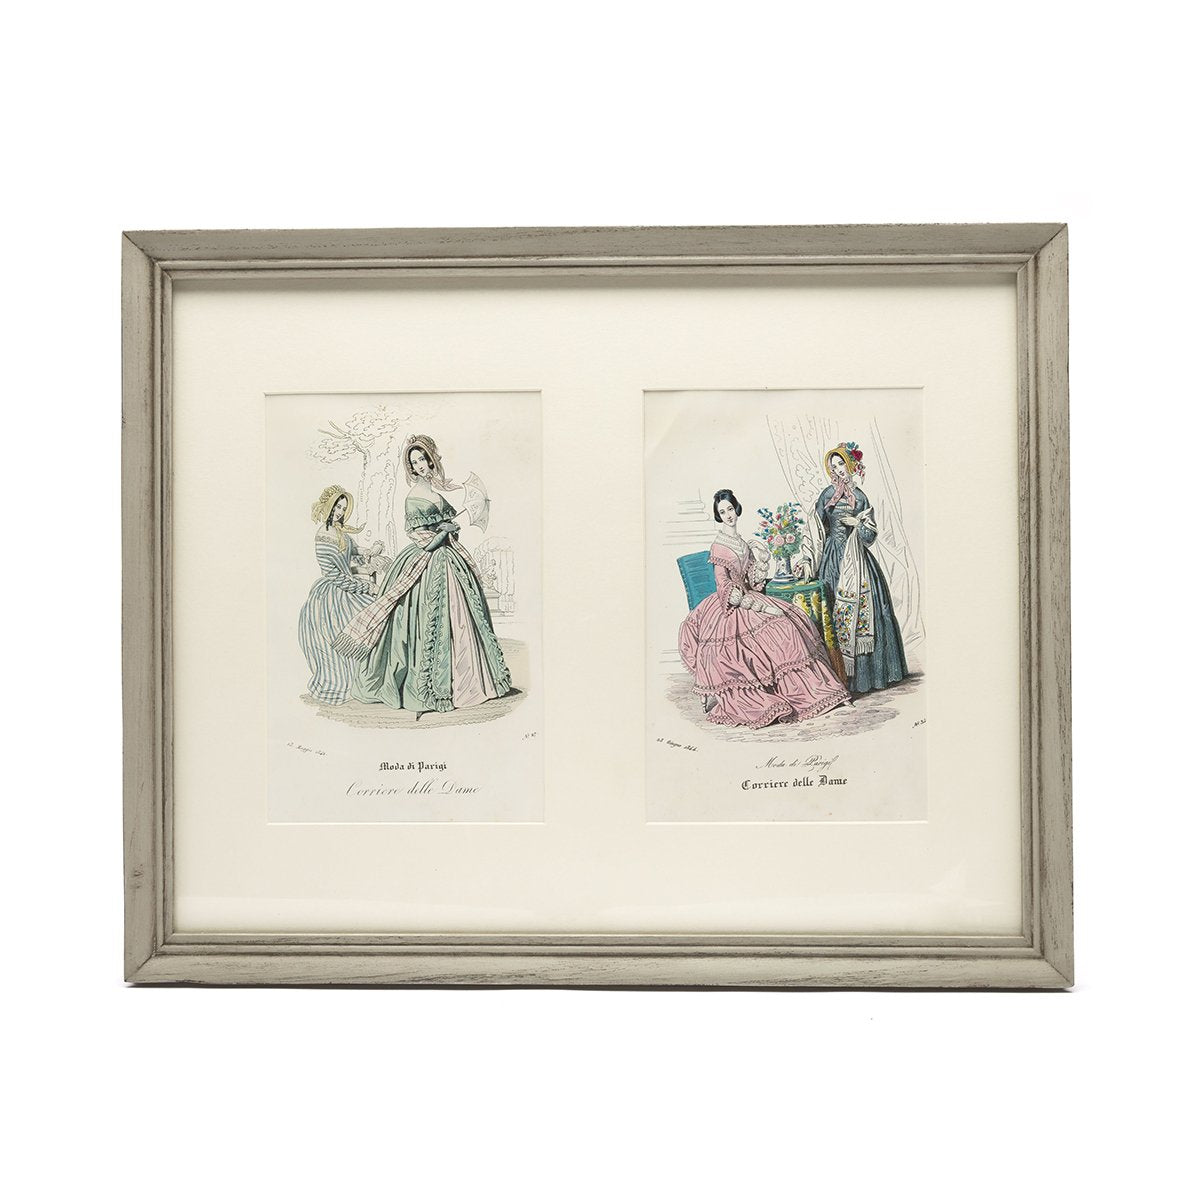 Victorian Art Print in Wooden Frame - Tradition 1 - Notbrand